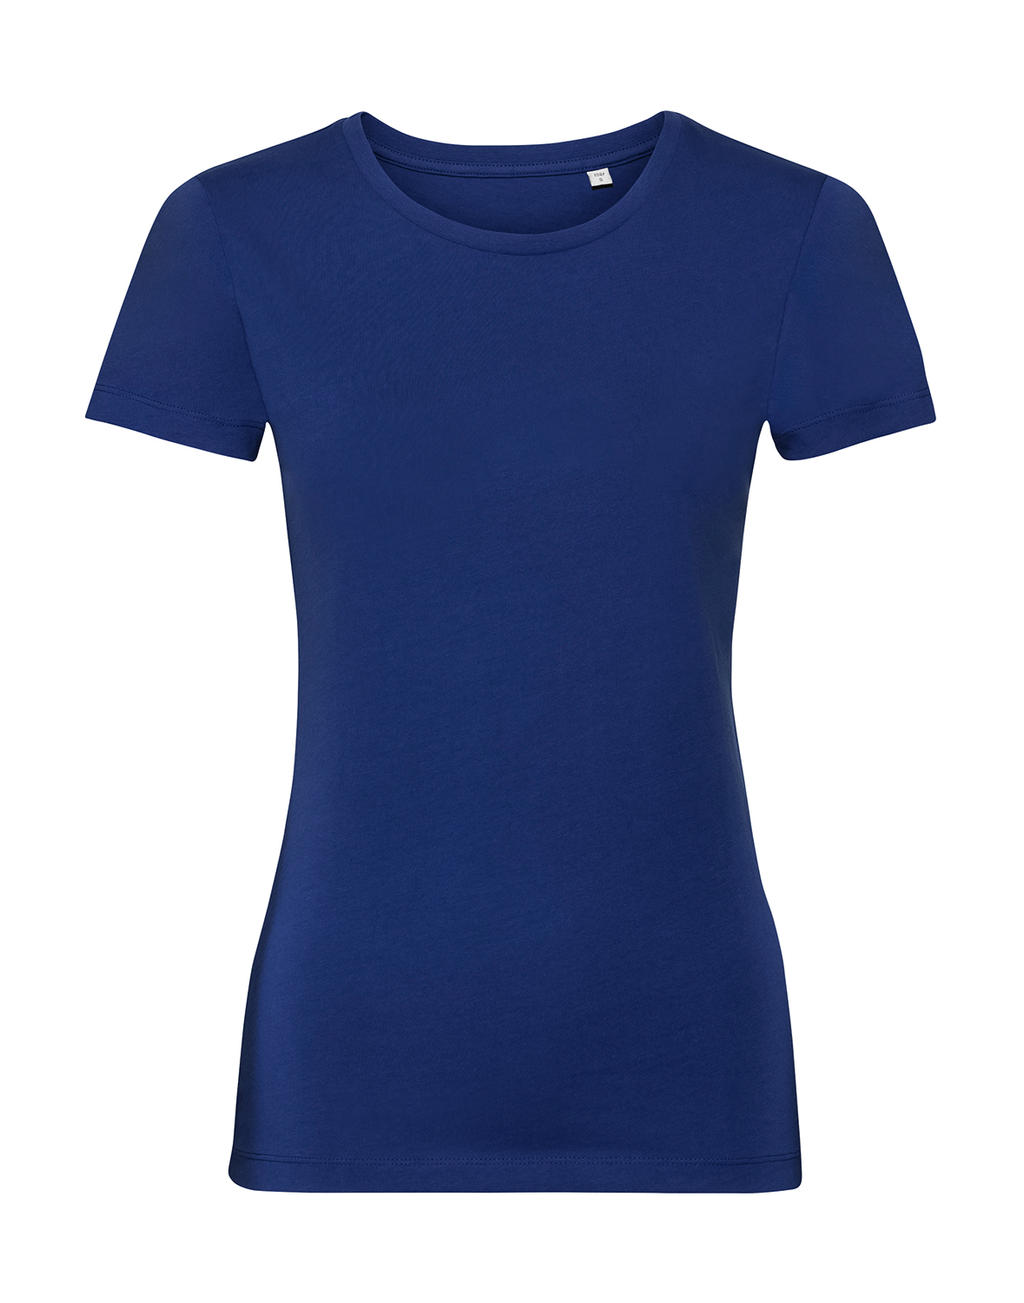  Ladies? Pure Organic Tee in Farbe Bright Royal